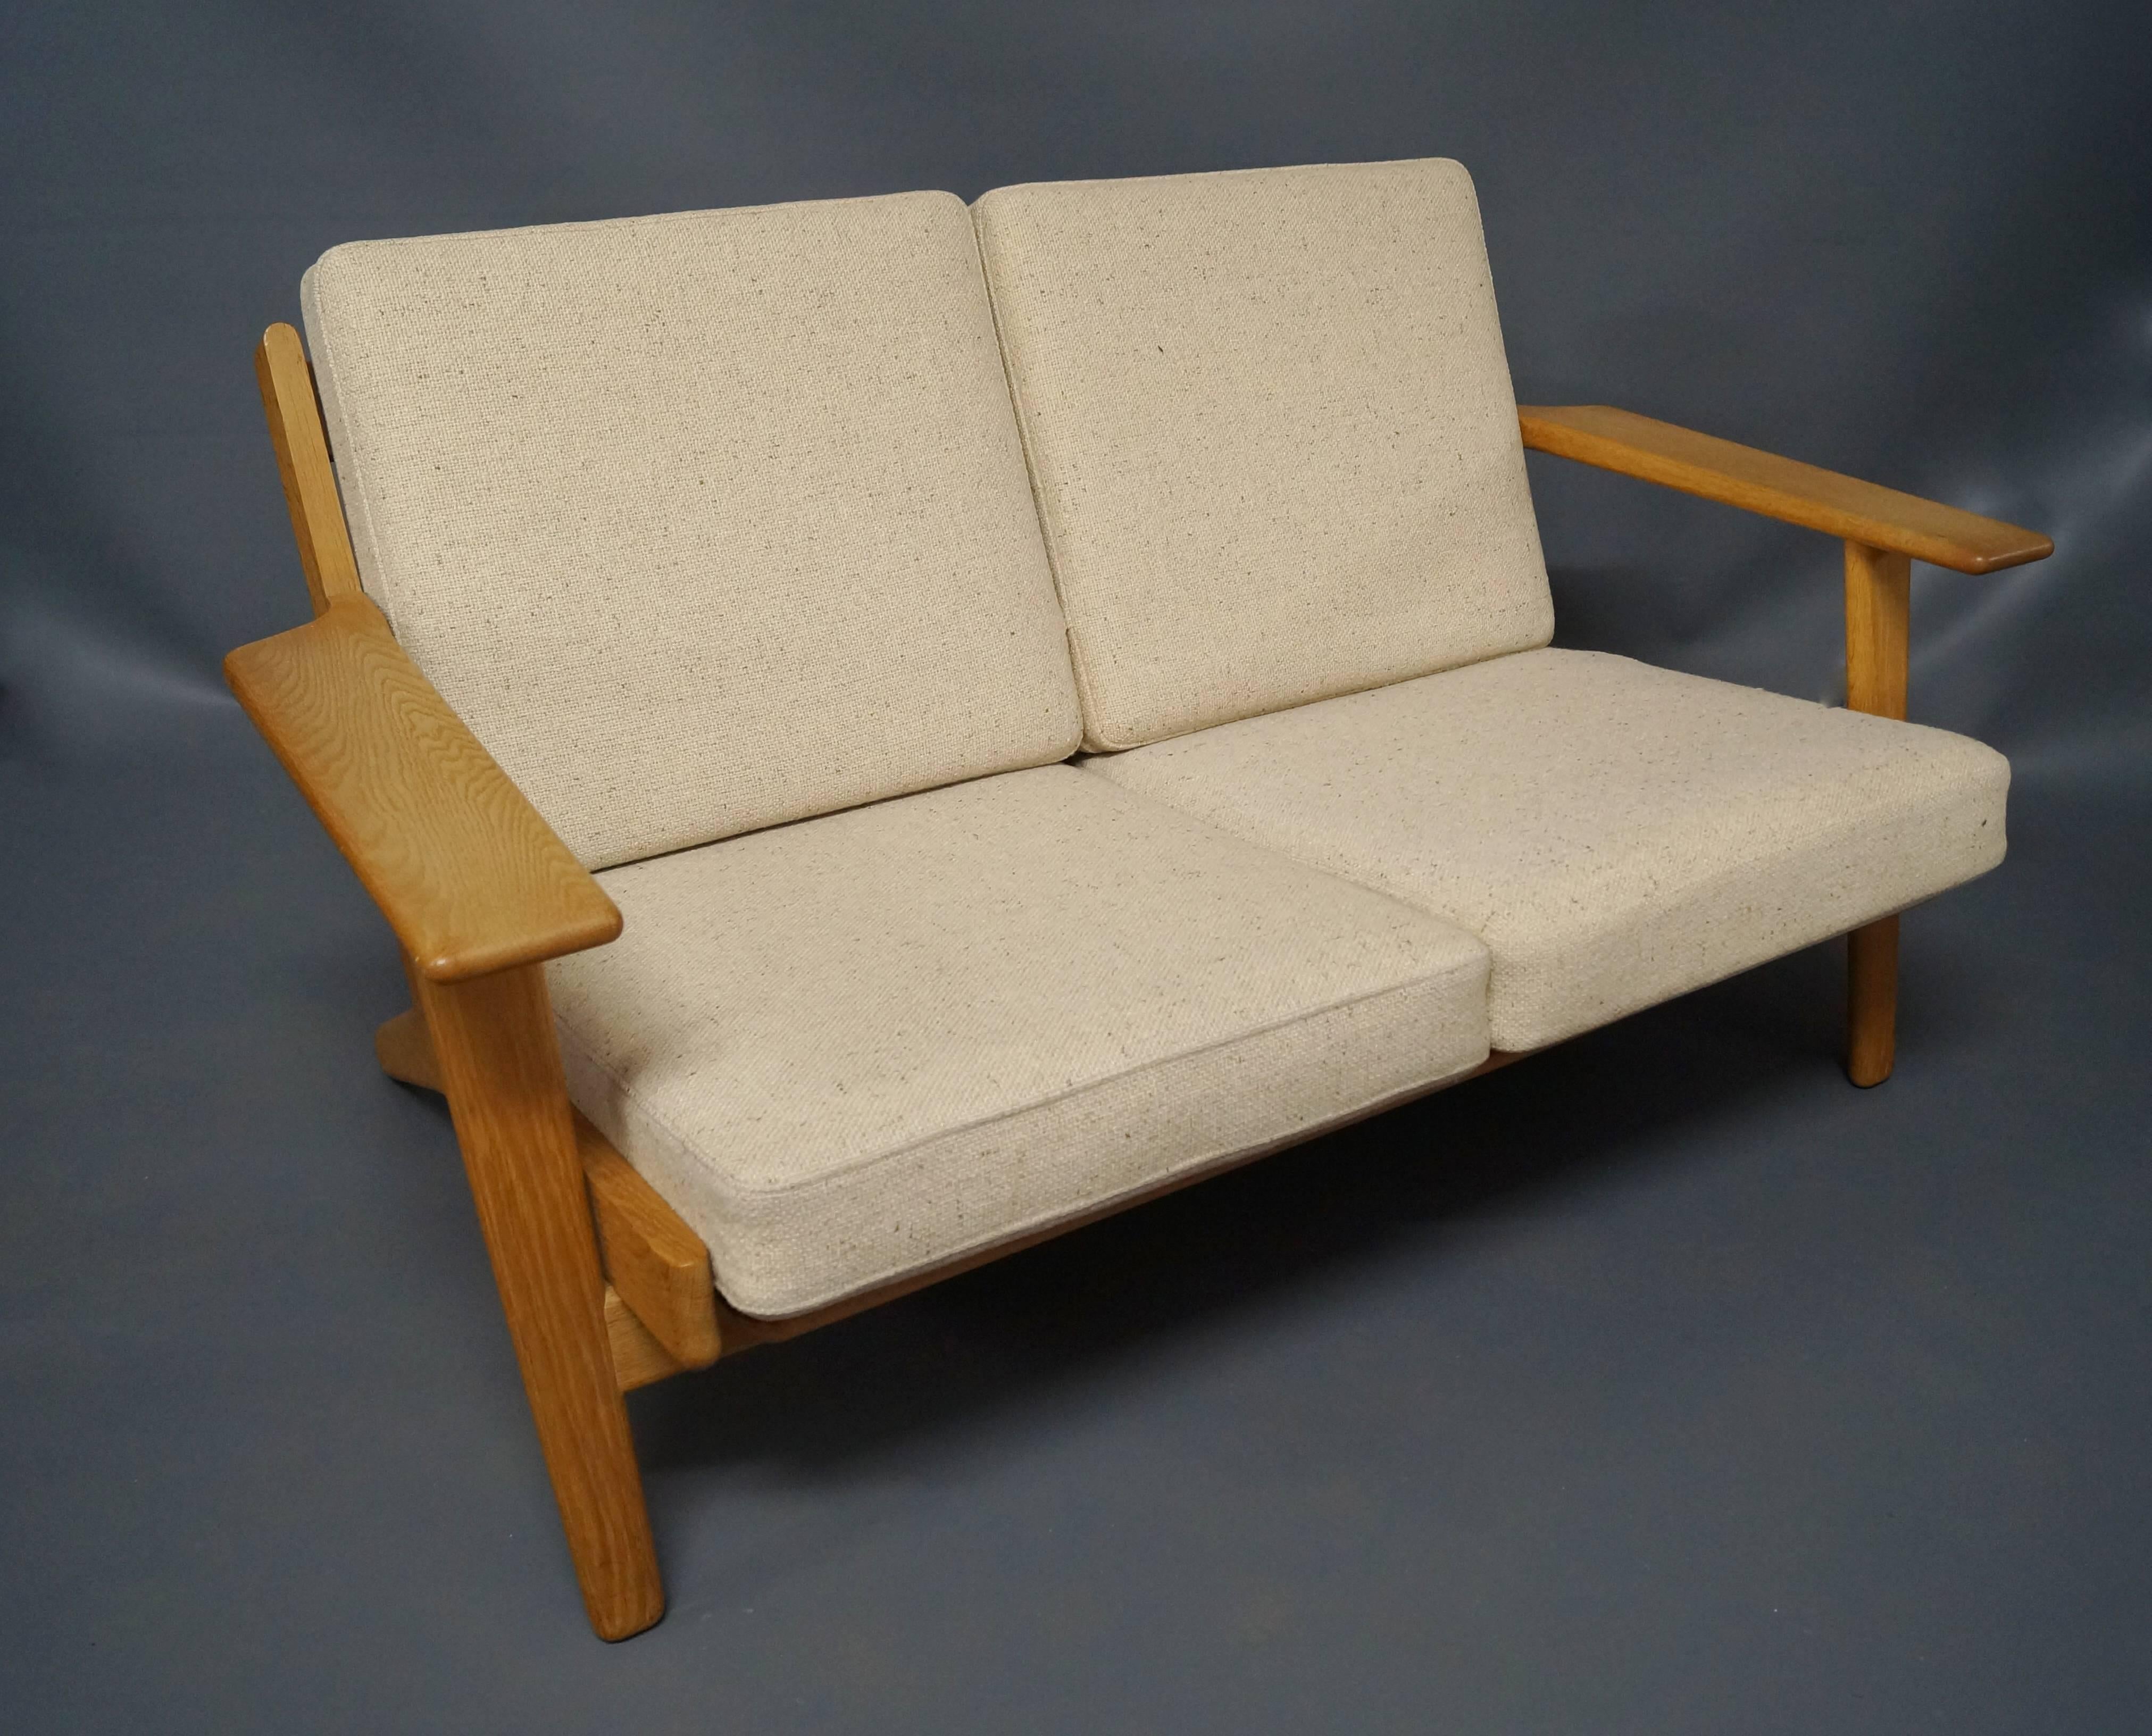 GE 290 two-person sofa designed by Hans J. Wegner in 1953 and manufactured by GETAMA in the 1960s. The sofa is in oak and light Hallingdal wool.
 